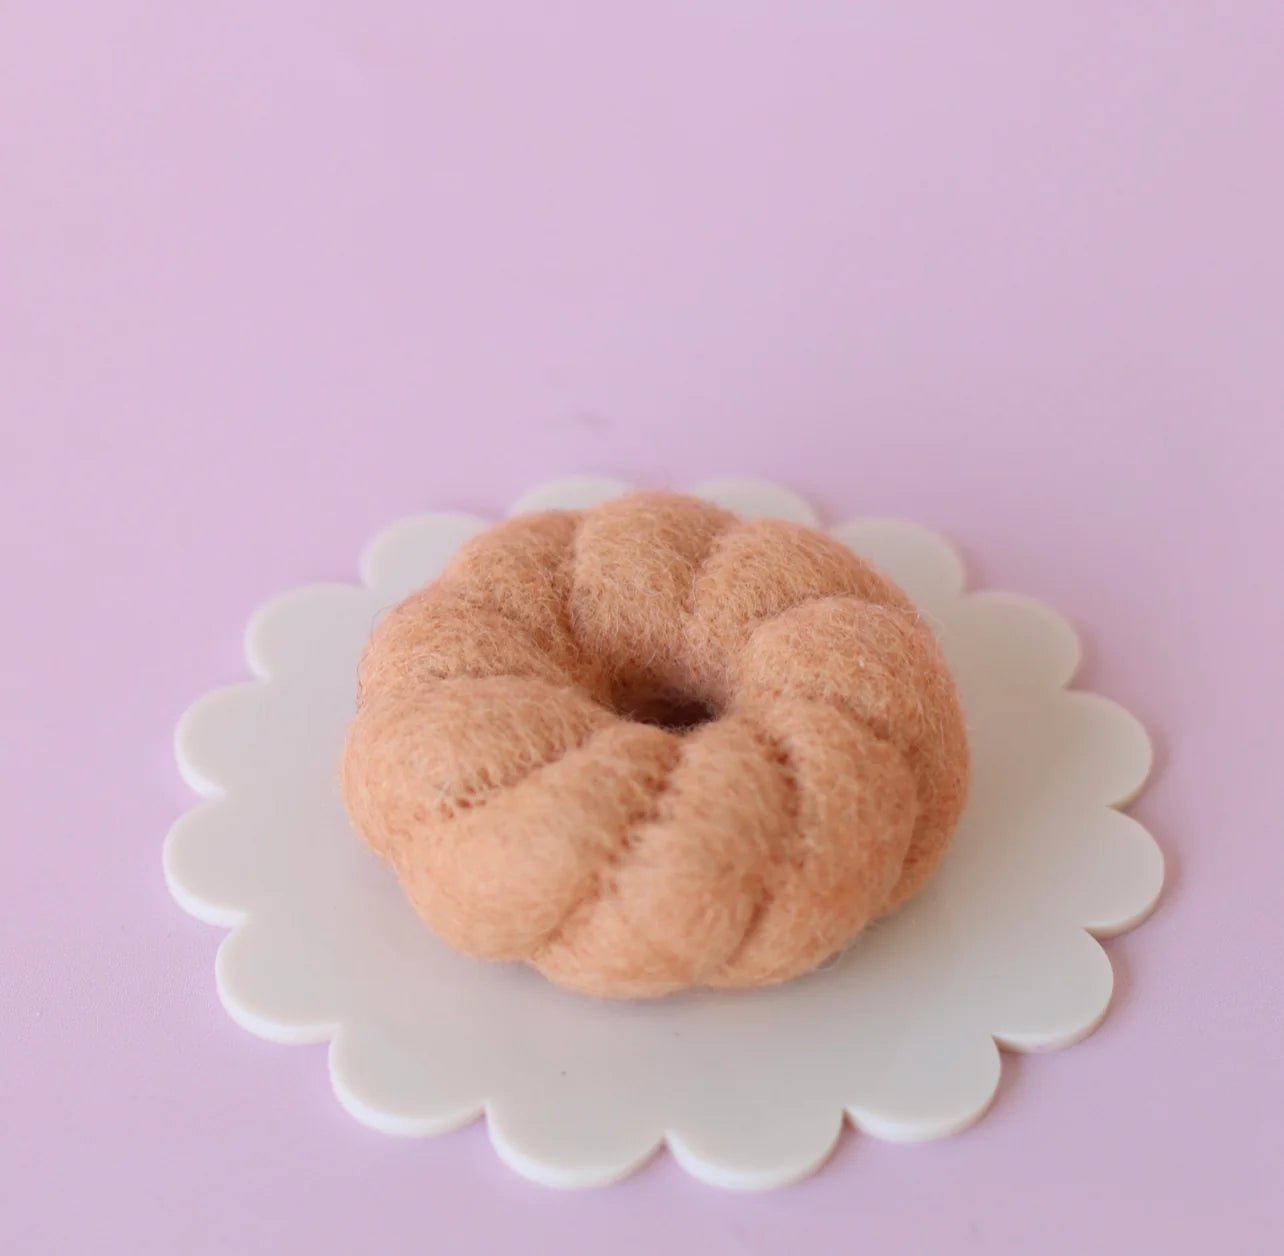 JUNI MOON | FESTIVE DONUT (MULTIPLE OPTIONS) Iced Cruller by JUNI MOON - The Playful Collective